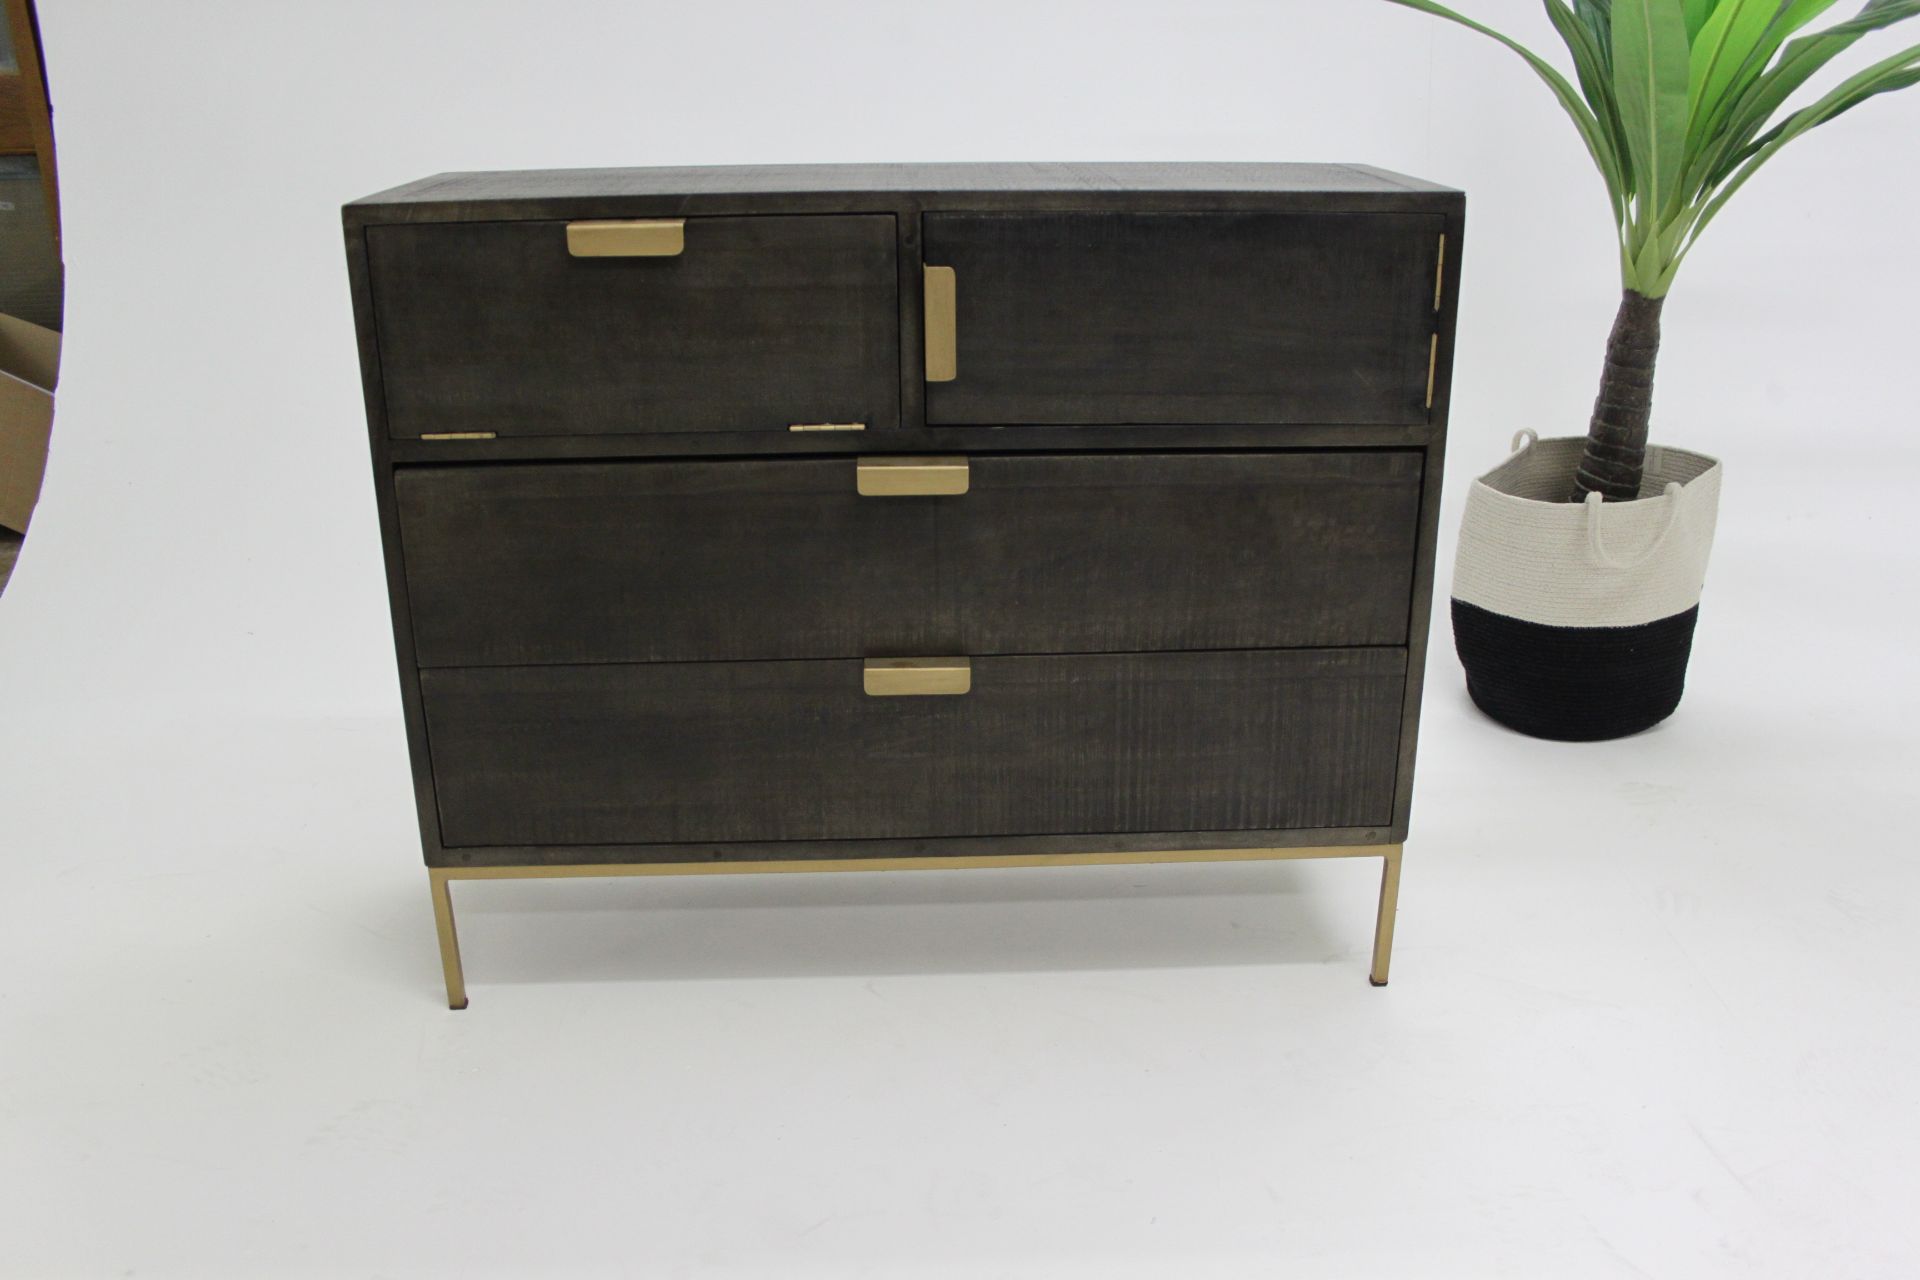 Gatsby Chest Black And Gold Add Some Sophistication To Your Home With The Gatsby Chest Its Art - Image 2 of 3